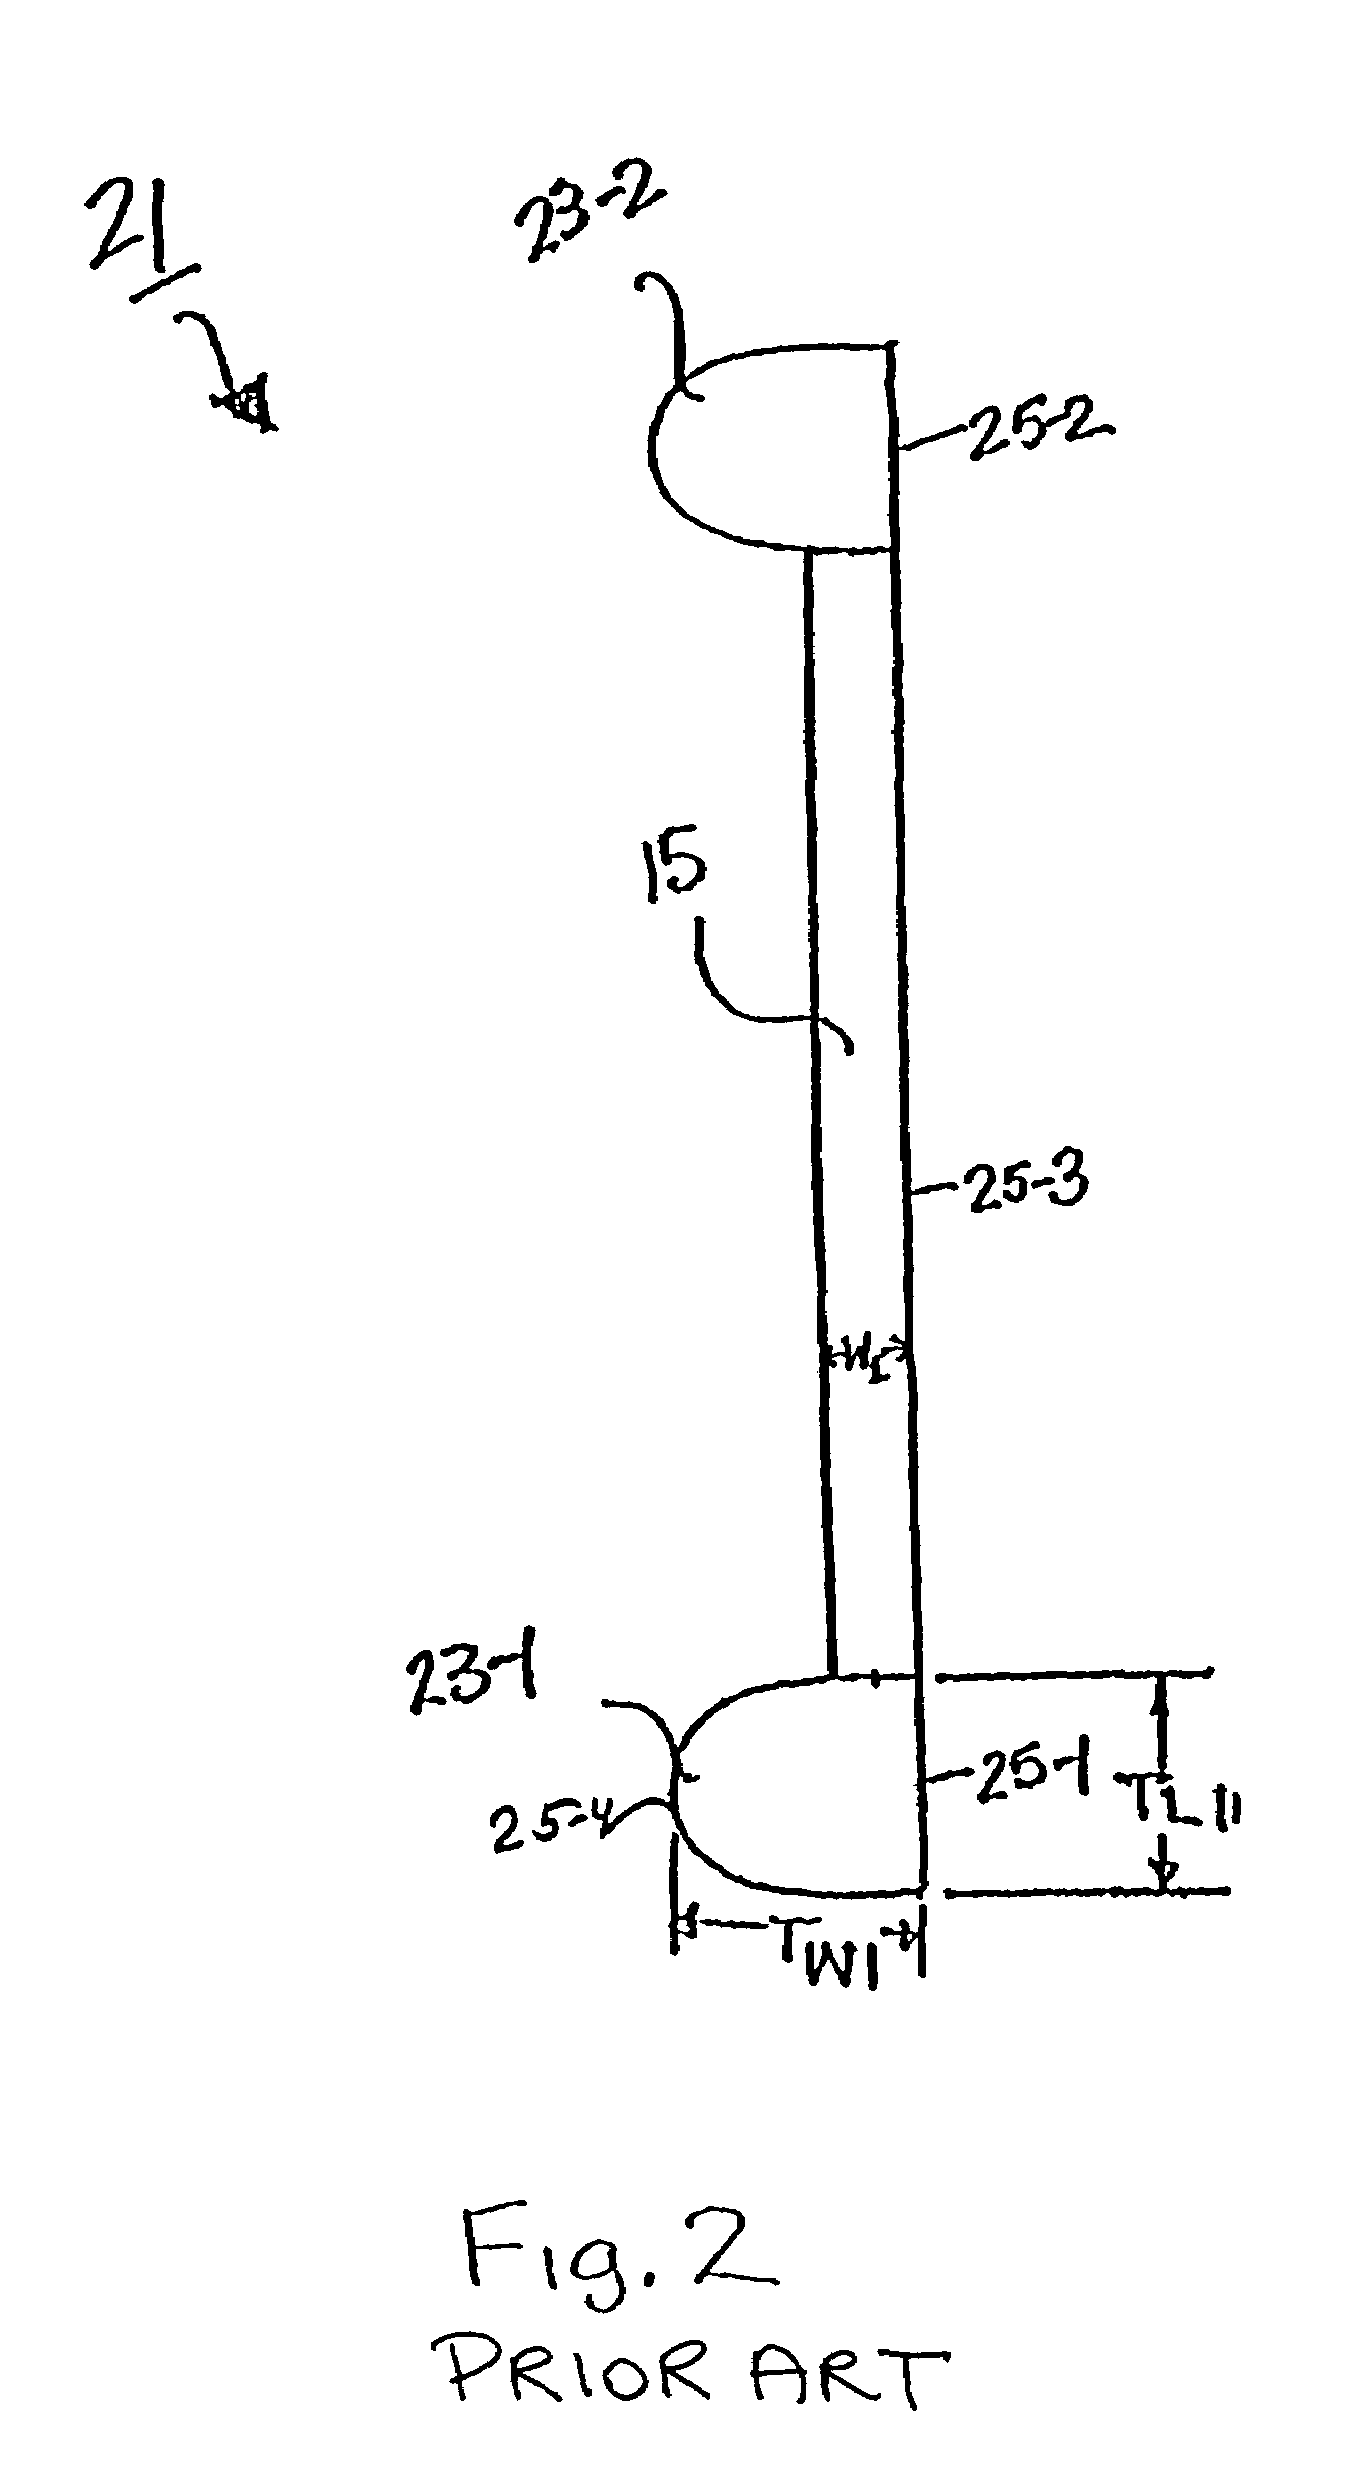 Continuously connected fastener stock and method of manufacturing the same